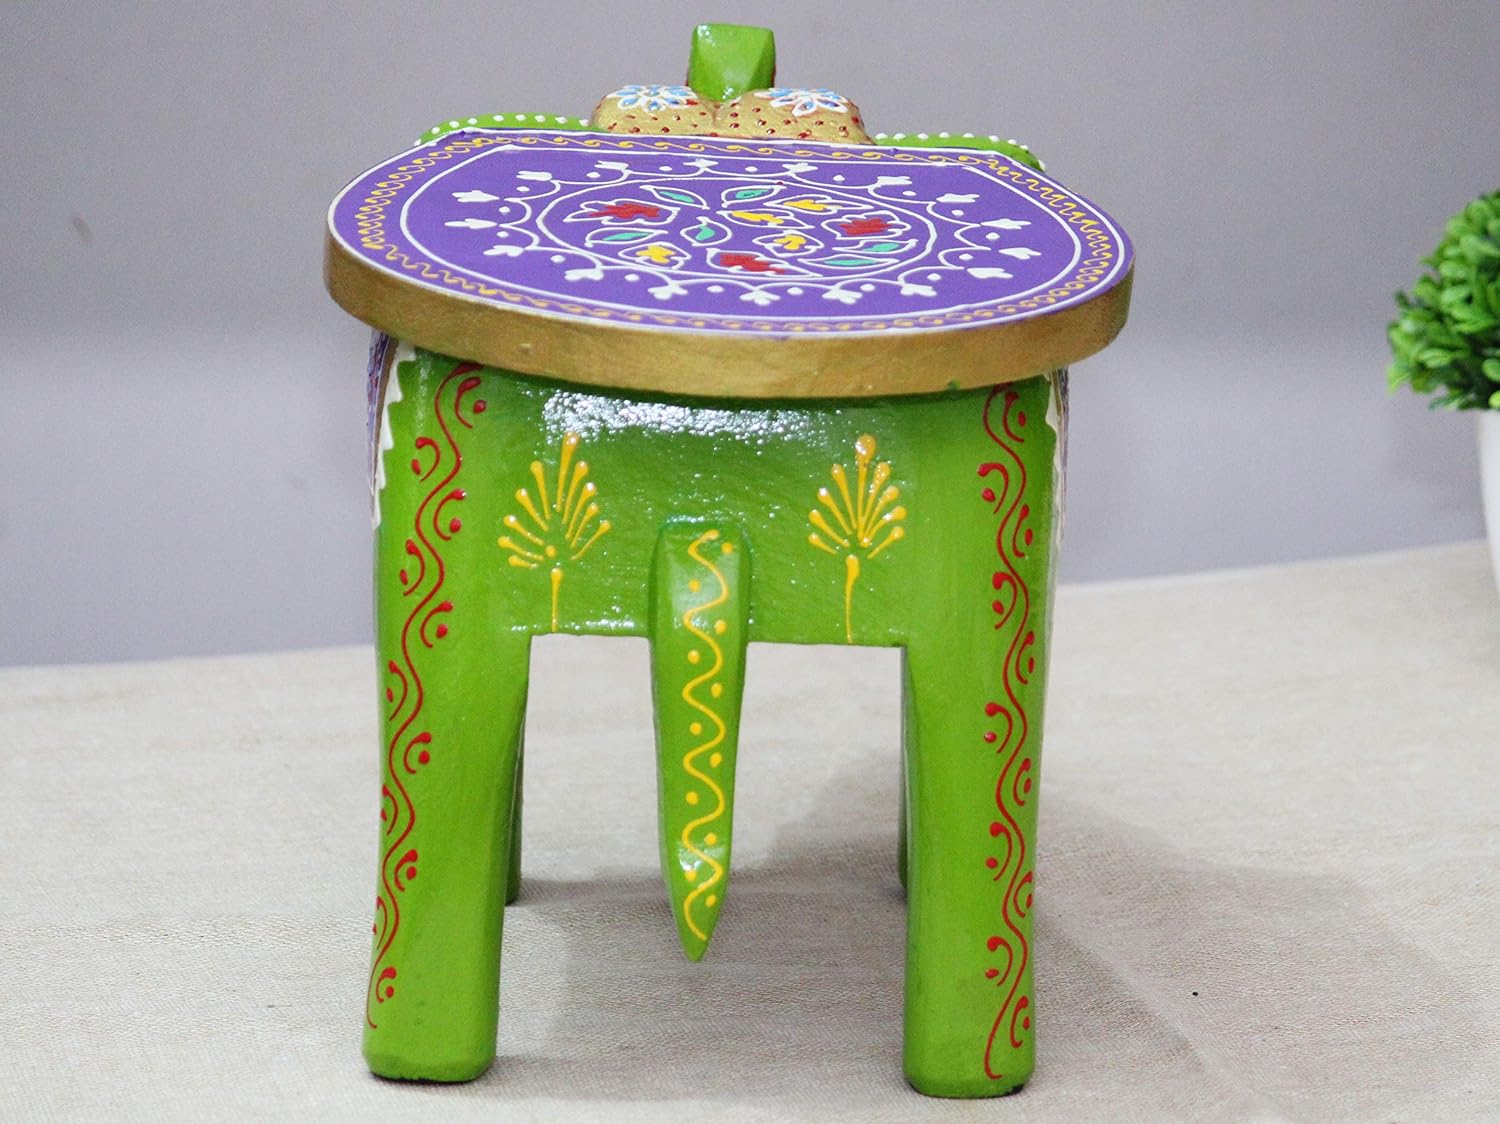 Hand-Painted Colorful Wooden Elephant Stool (Green)